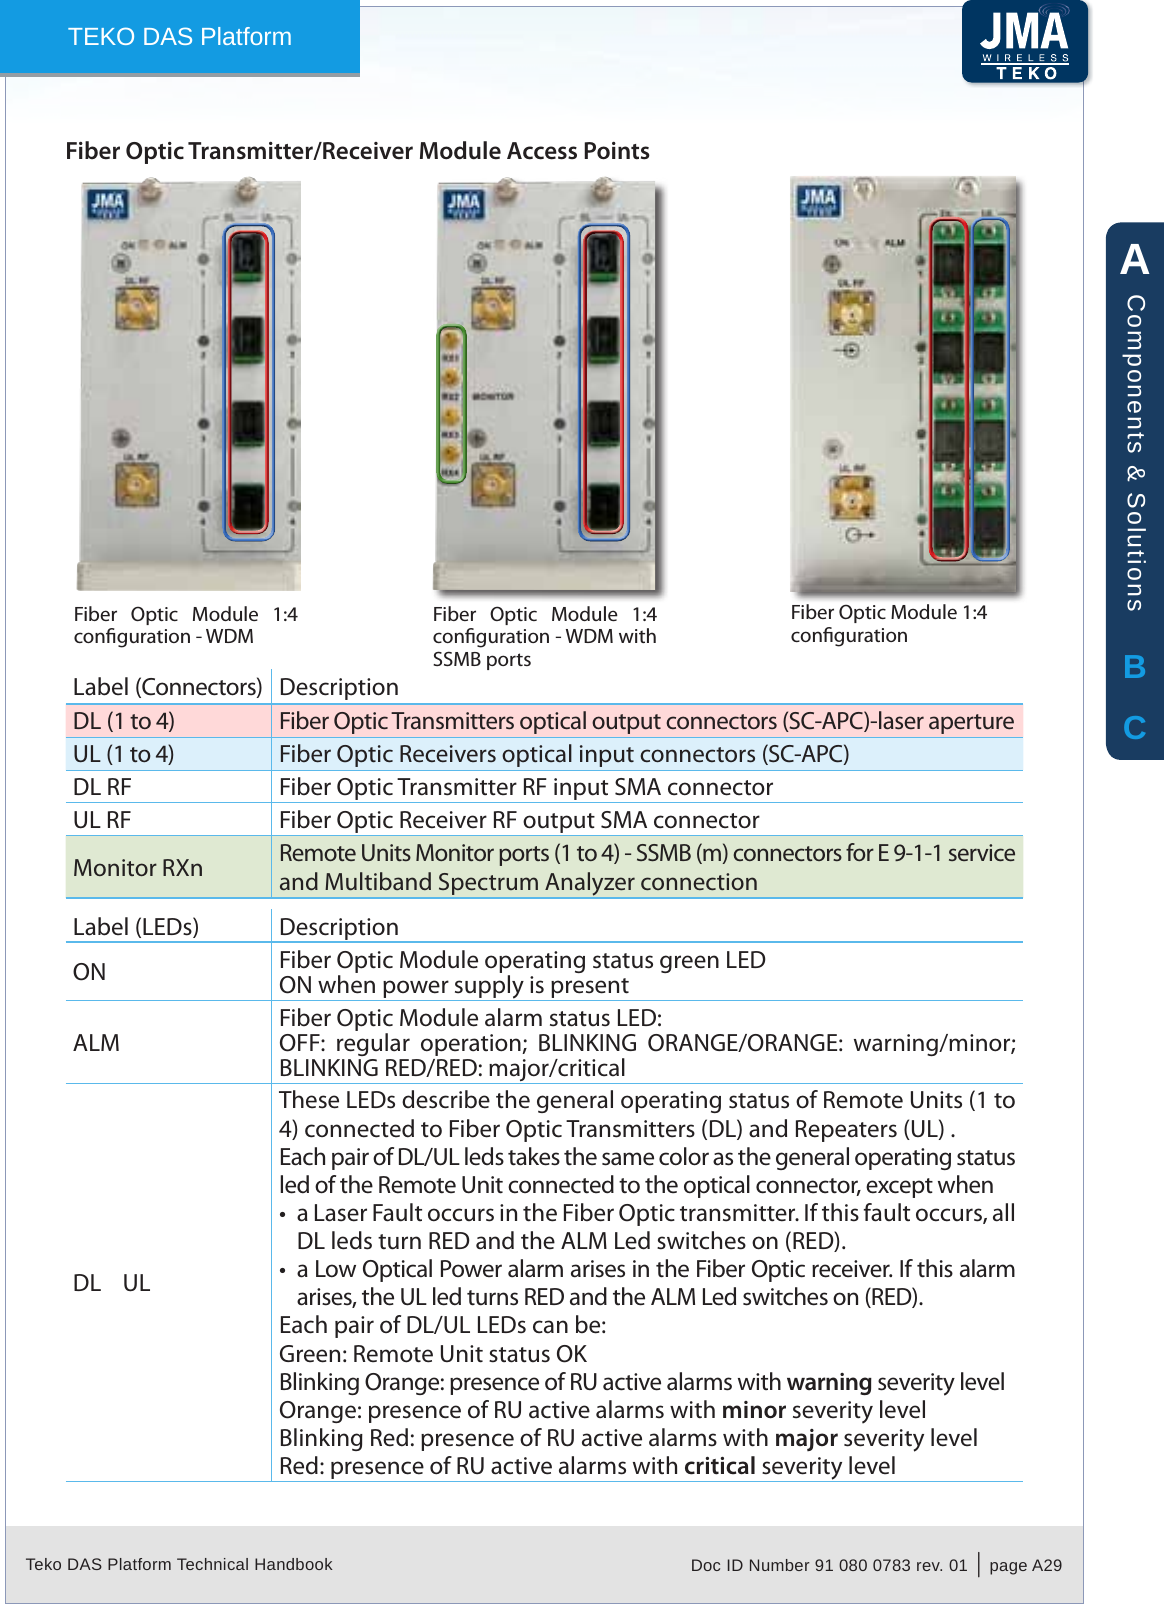 Teko DAS Platform Technical Handbook Doc ID Number 91 080 0783 rev. 01  |  page A29TEKO DAS PlatformFiber Optic Transmitter/Receiver Module Access PointsLabel (Connectors) DescriptionDL (1 to 4) Fiber Optic Transmitters optical output connectors (SC-APC)-laser apertureUL (1 to 4) Fiber Optic Receivers optical input connectors (SC-APC)DL RF Fiber Optic Transmitter RF input SMA connectorUL RF Fiber Optic Receiver RF output SMA connectorMonitor RXn Remote Units Monitor ports (1 to 4) - SSMB (m) connectors for E 9-1-1 service and Multiband Spectrum Analyzer connectionLabel (LEDs) DescriptionON Fiber Optic Module operating status green LEDON when power supply is presentALMFiber Optic Module alarm status LED:OFF:  regular  operation;  BLINKING  ORANGE/ORANGE:  warning/minor; BLINKING RED/RED: major/criticalDL    ULThese LEDs describe the general operating status of Remote Units (1 to 4) connected to Fiber Optic Transmitters (DL) and Repeaters (UL) .Each pair of DL/UL leds takes the same color as the general operating status led of the Remote Unit connected to the optical connector, except whena Laser Fault occurs in the Fiber Optic transmitter. If this fault occurs, all •DL leds turn RED and the ALM Led switches on (RED).a Low Optical Power alarm arises in the Fiber Optic receiver. If this alarm •arises, the UL led turns RED and the ALM Led switches on (RED).Each pair of DL/UL LEDs can be:Green: Remote Unit status OKBlinking Orange: presence of RU active alarms with warning severity levelOrange: presence of RU active alarms with minor severity levelBlinking Red: presence of RU active alarms with major severity levelRed: presence of RU active alarms with critical severity levelFiber Optic Module 1:4 congurationFiber  Optic  Module  1:4 conguration - WDMFiber  Optic  Module  1:4 conguration - WDM with  SSMB portsABCComponents &amp; Solutions